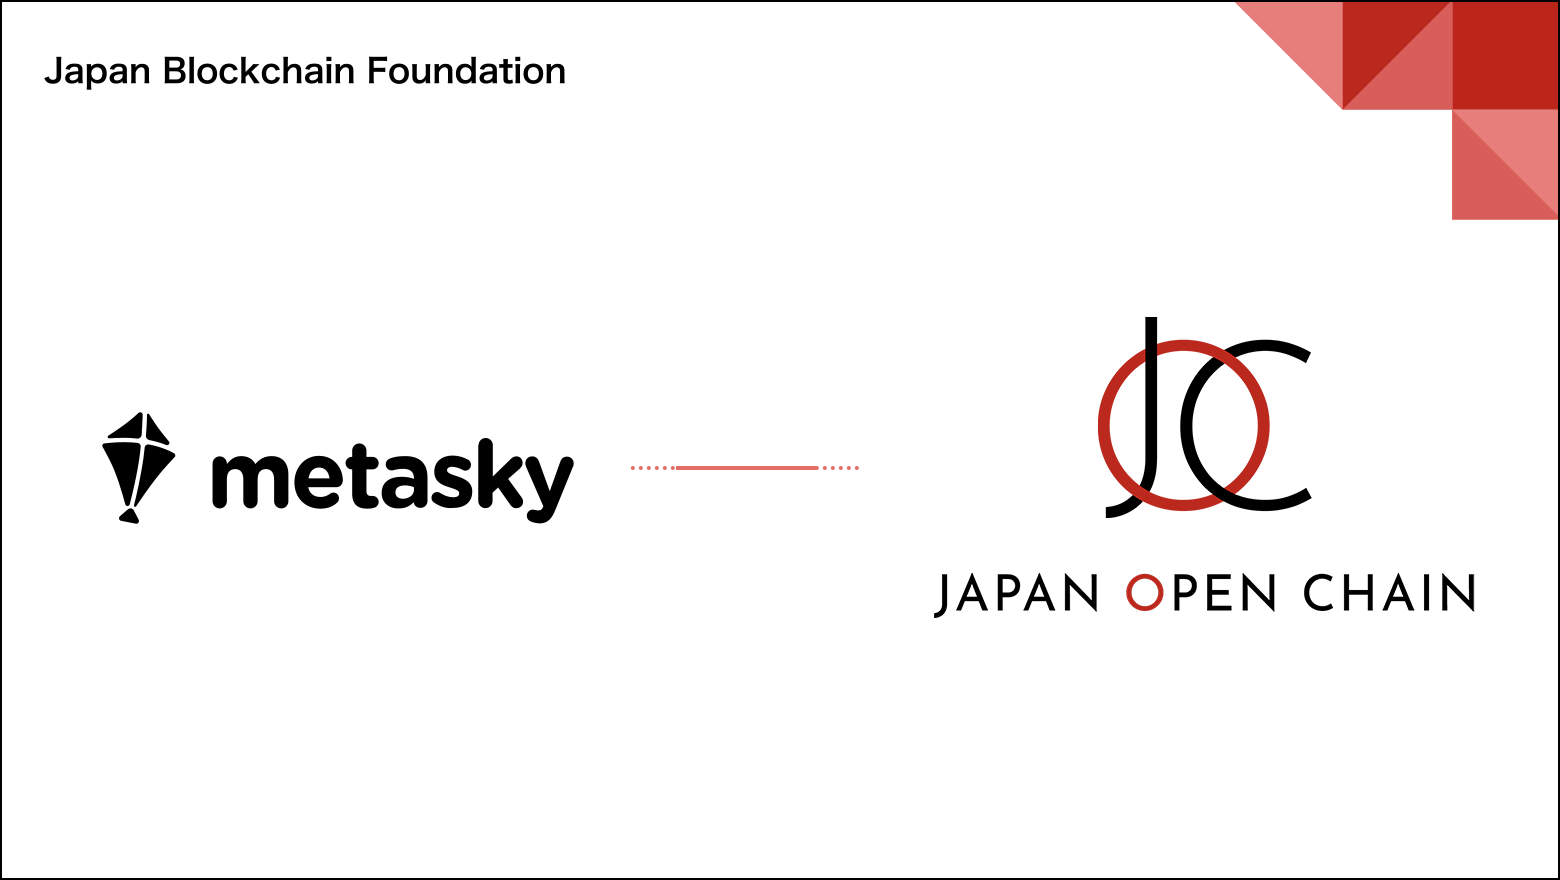 Wallet and Community Management Solutions by Metasky Now Available on Japan Open Chain